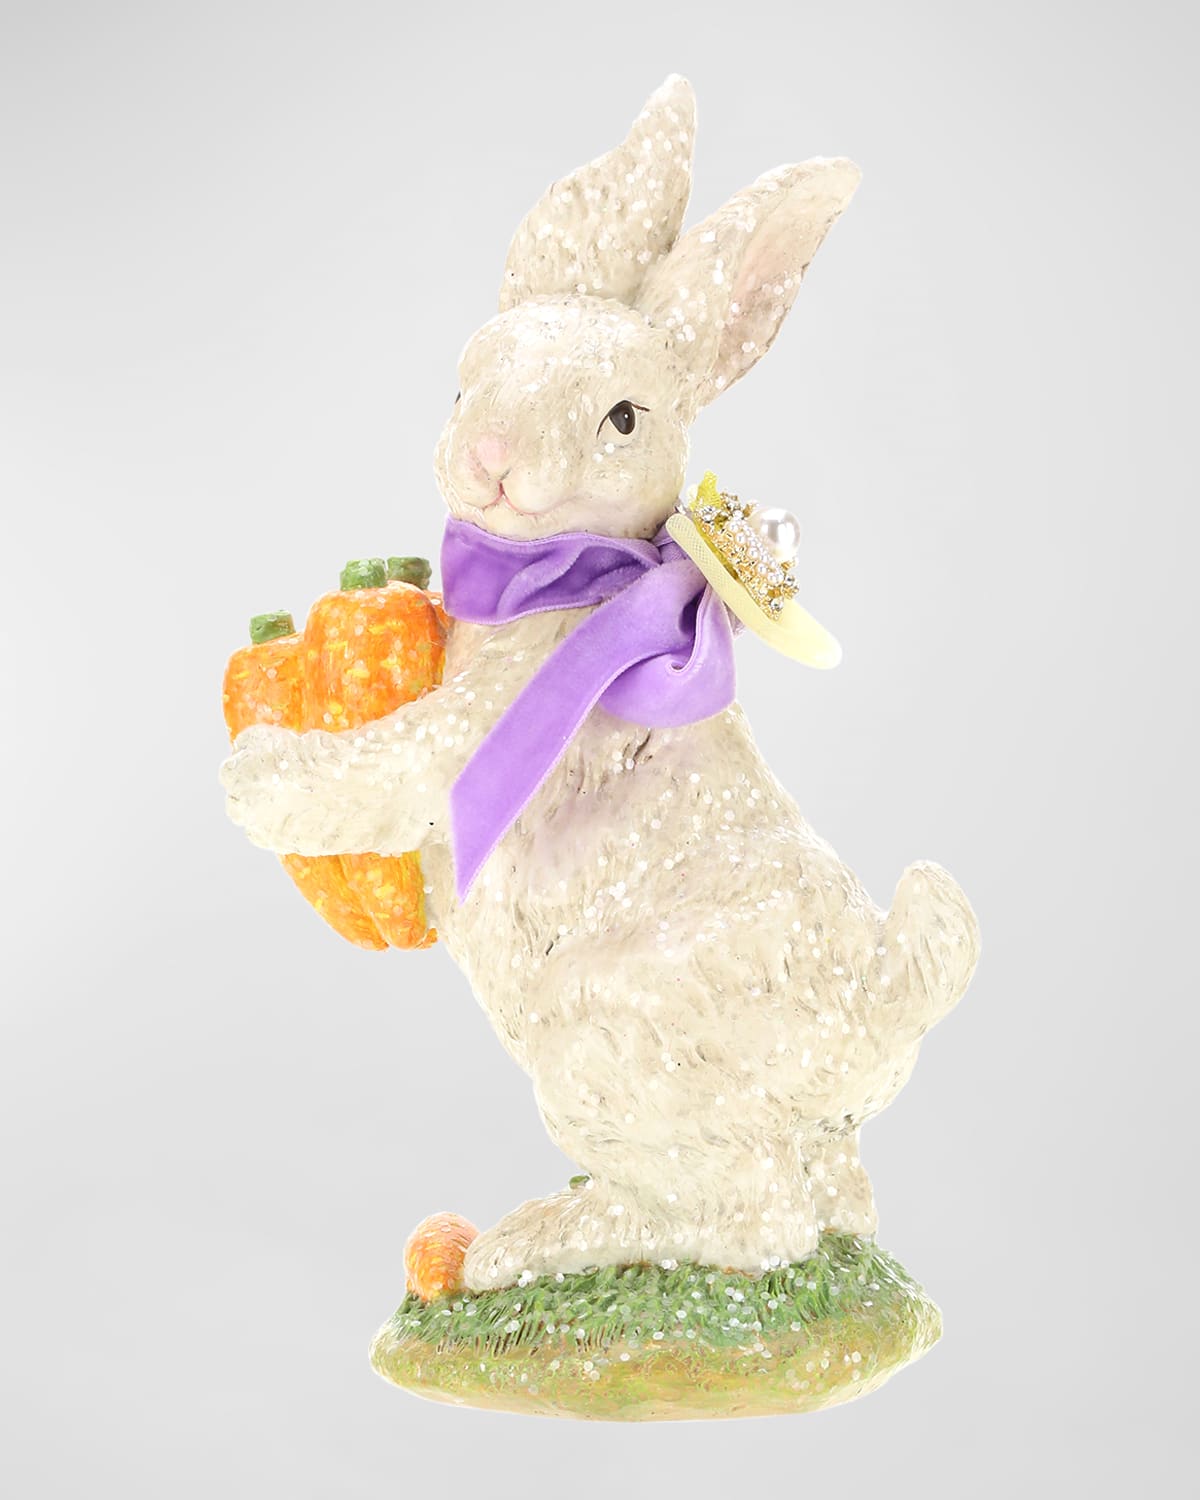 Jeweled Rabbit with Carrot - 8.5"